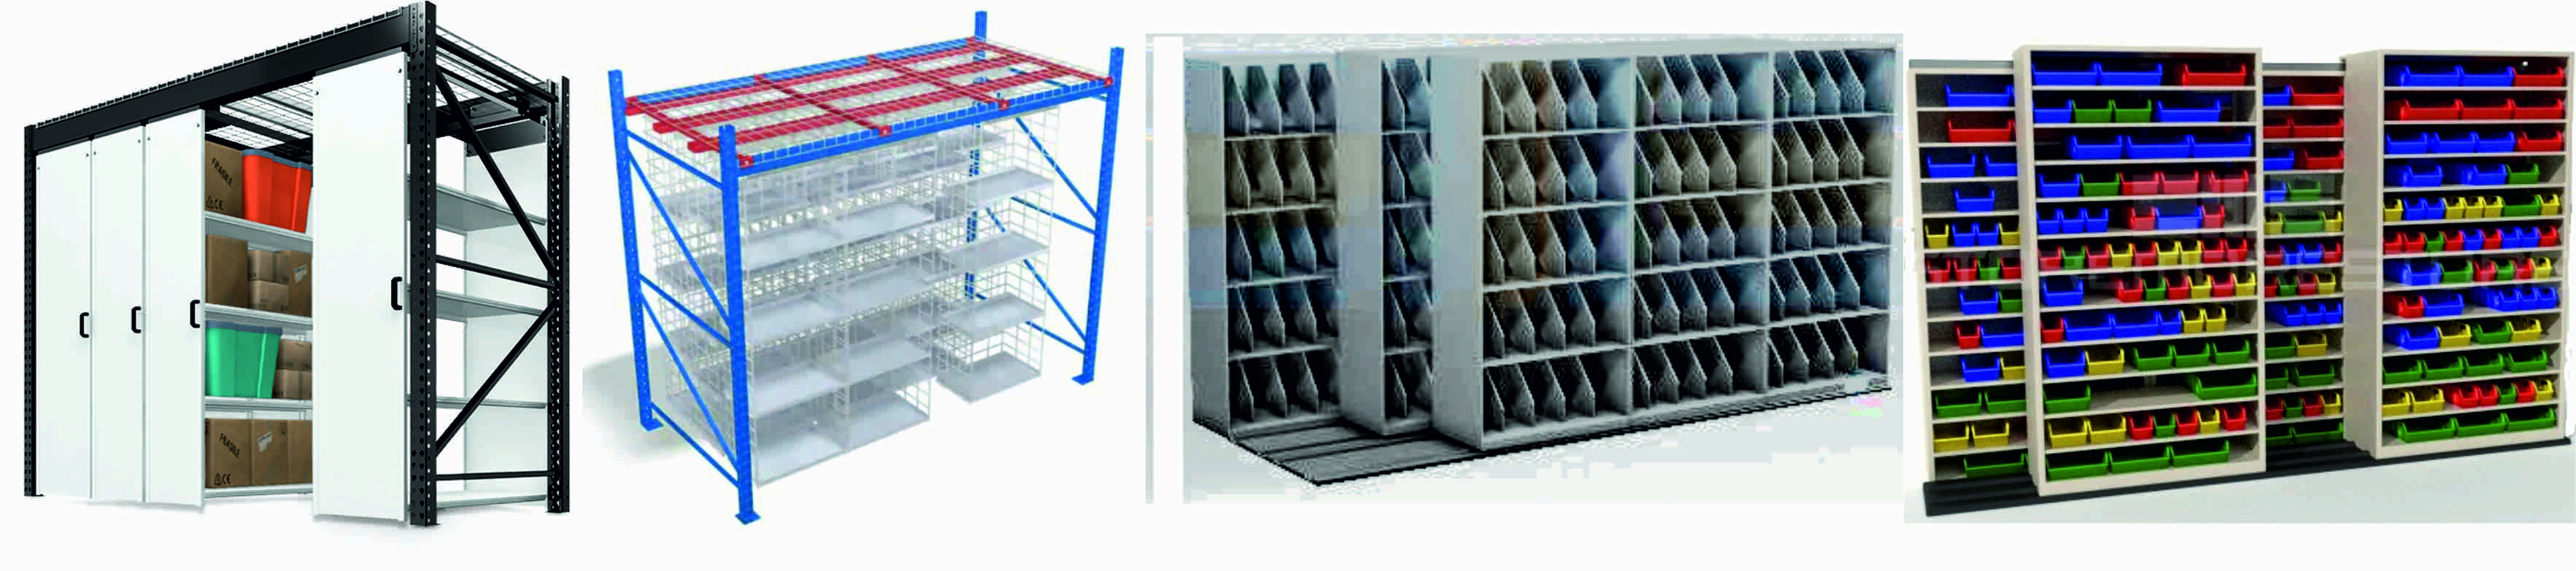 Mobile Shelves, Lateral Sliding Shelves For Storage Of Goods By Retailers-Wholesalers-Stockists